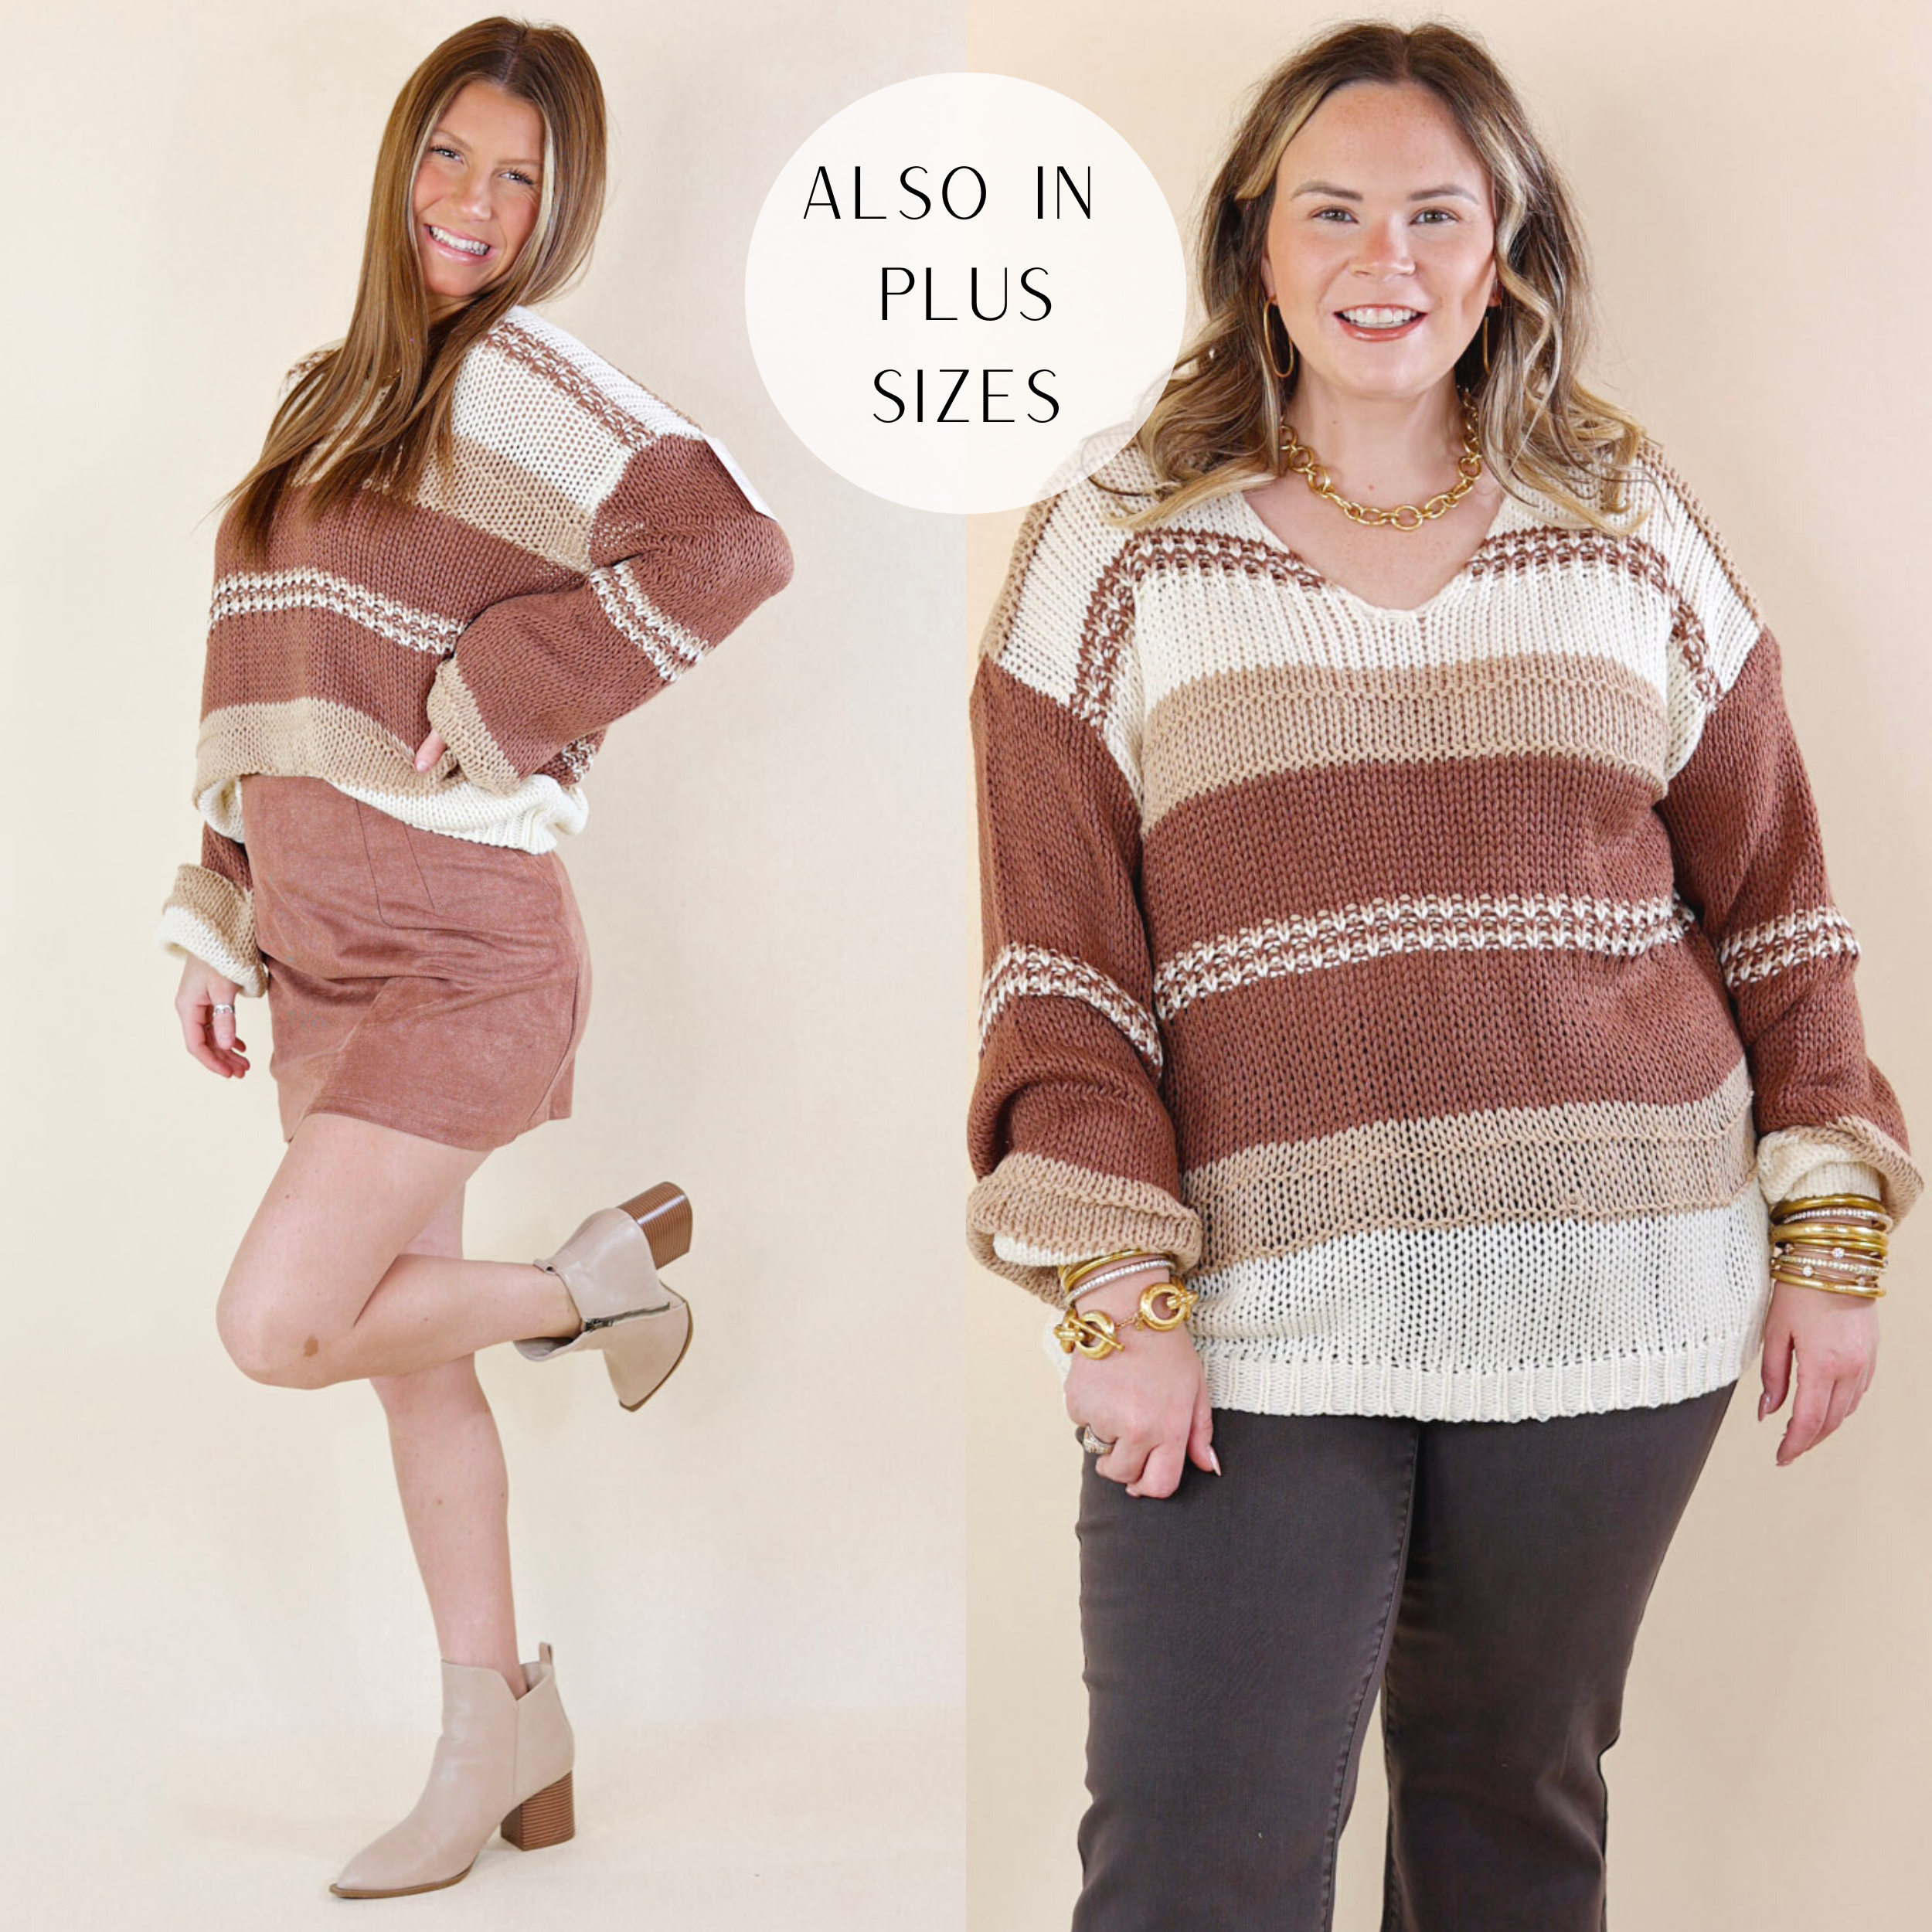 Model is wearing a brown and ivory striped sweater. Model has it paired with light wash bootcut jeans, white booties, and gold jewelry.